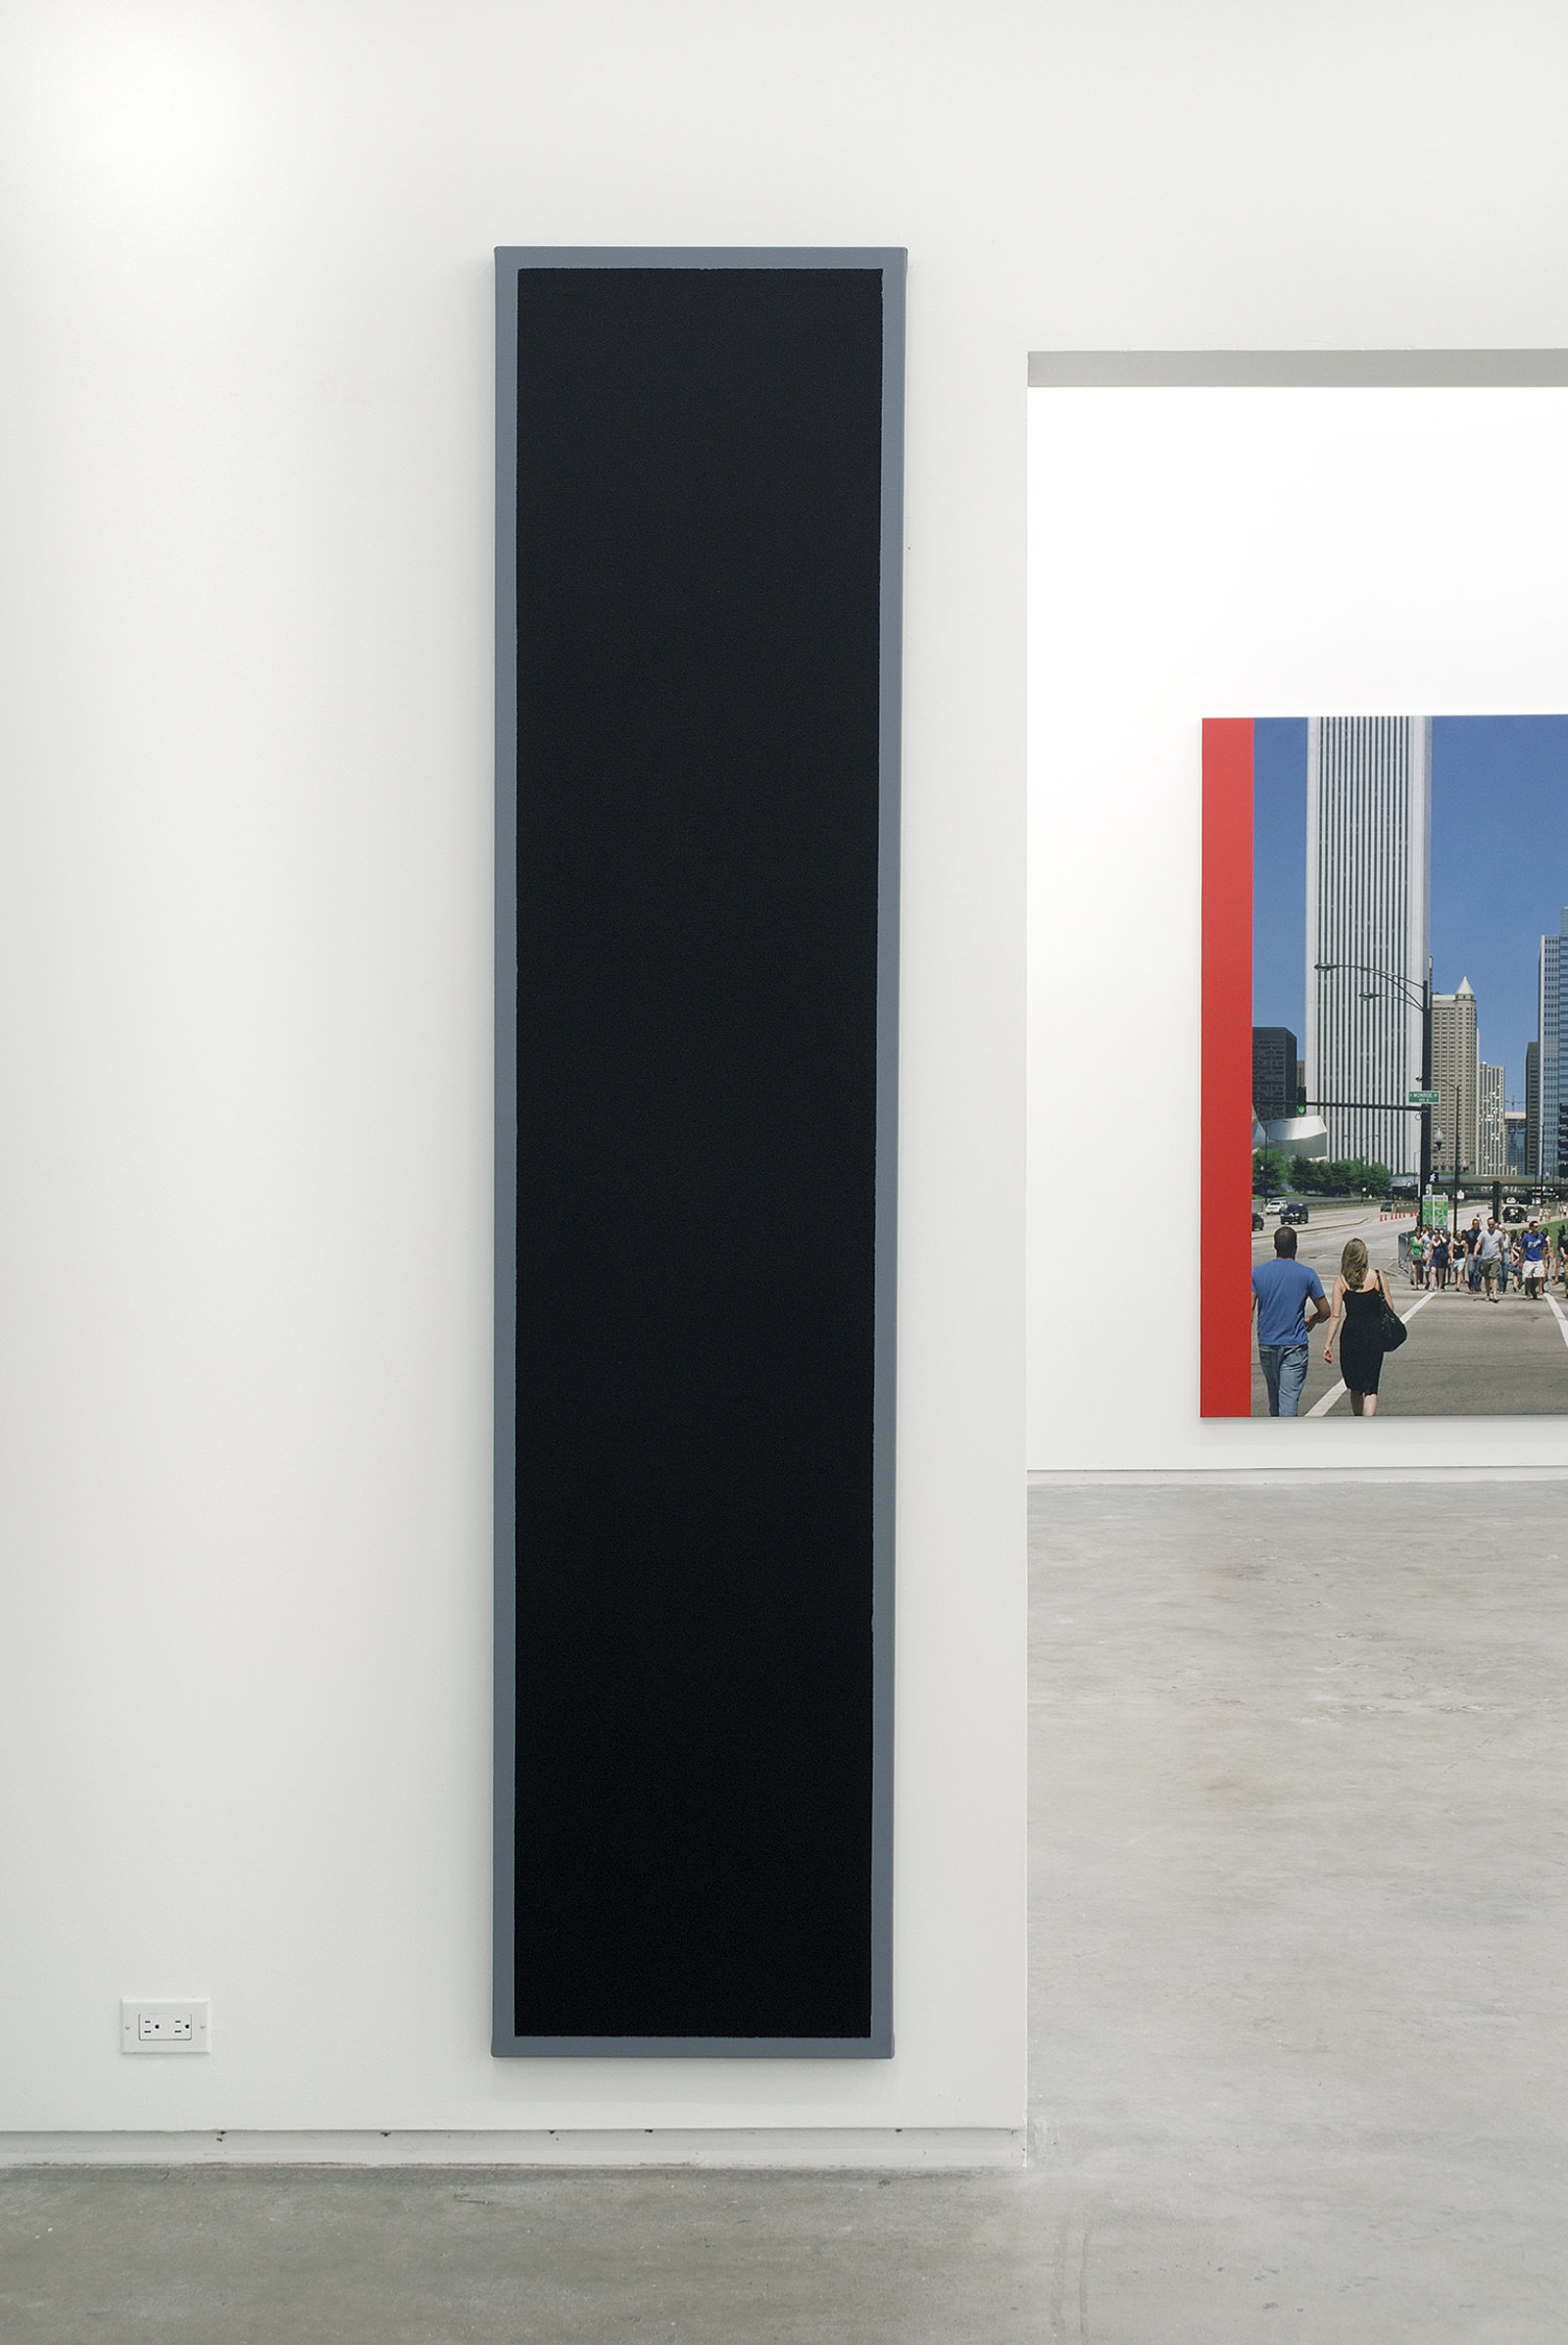 Ian Wallace, Untitled (Black Monochrome with Grey), 1967–2007, acrylic on canvas, 90 x 20 in. (229 x 51 cm)